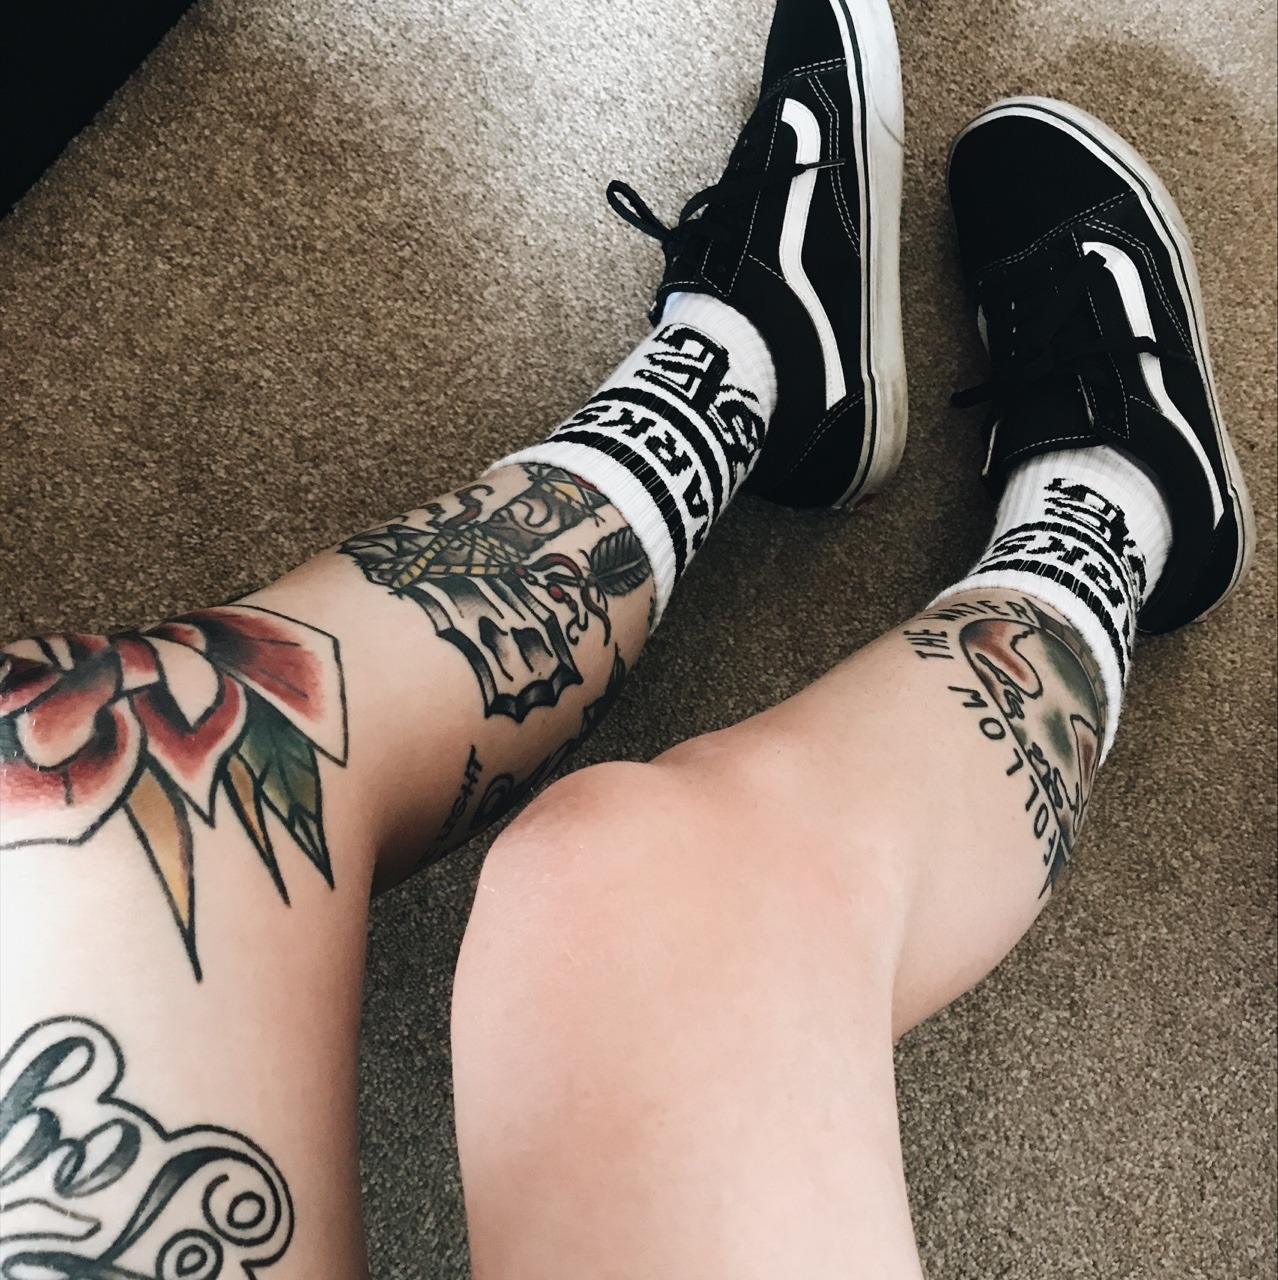 All the Piercings and Body Mods! — allthepiercingsandbodymods: Leg tattoos  by...